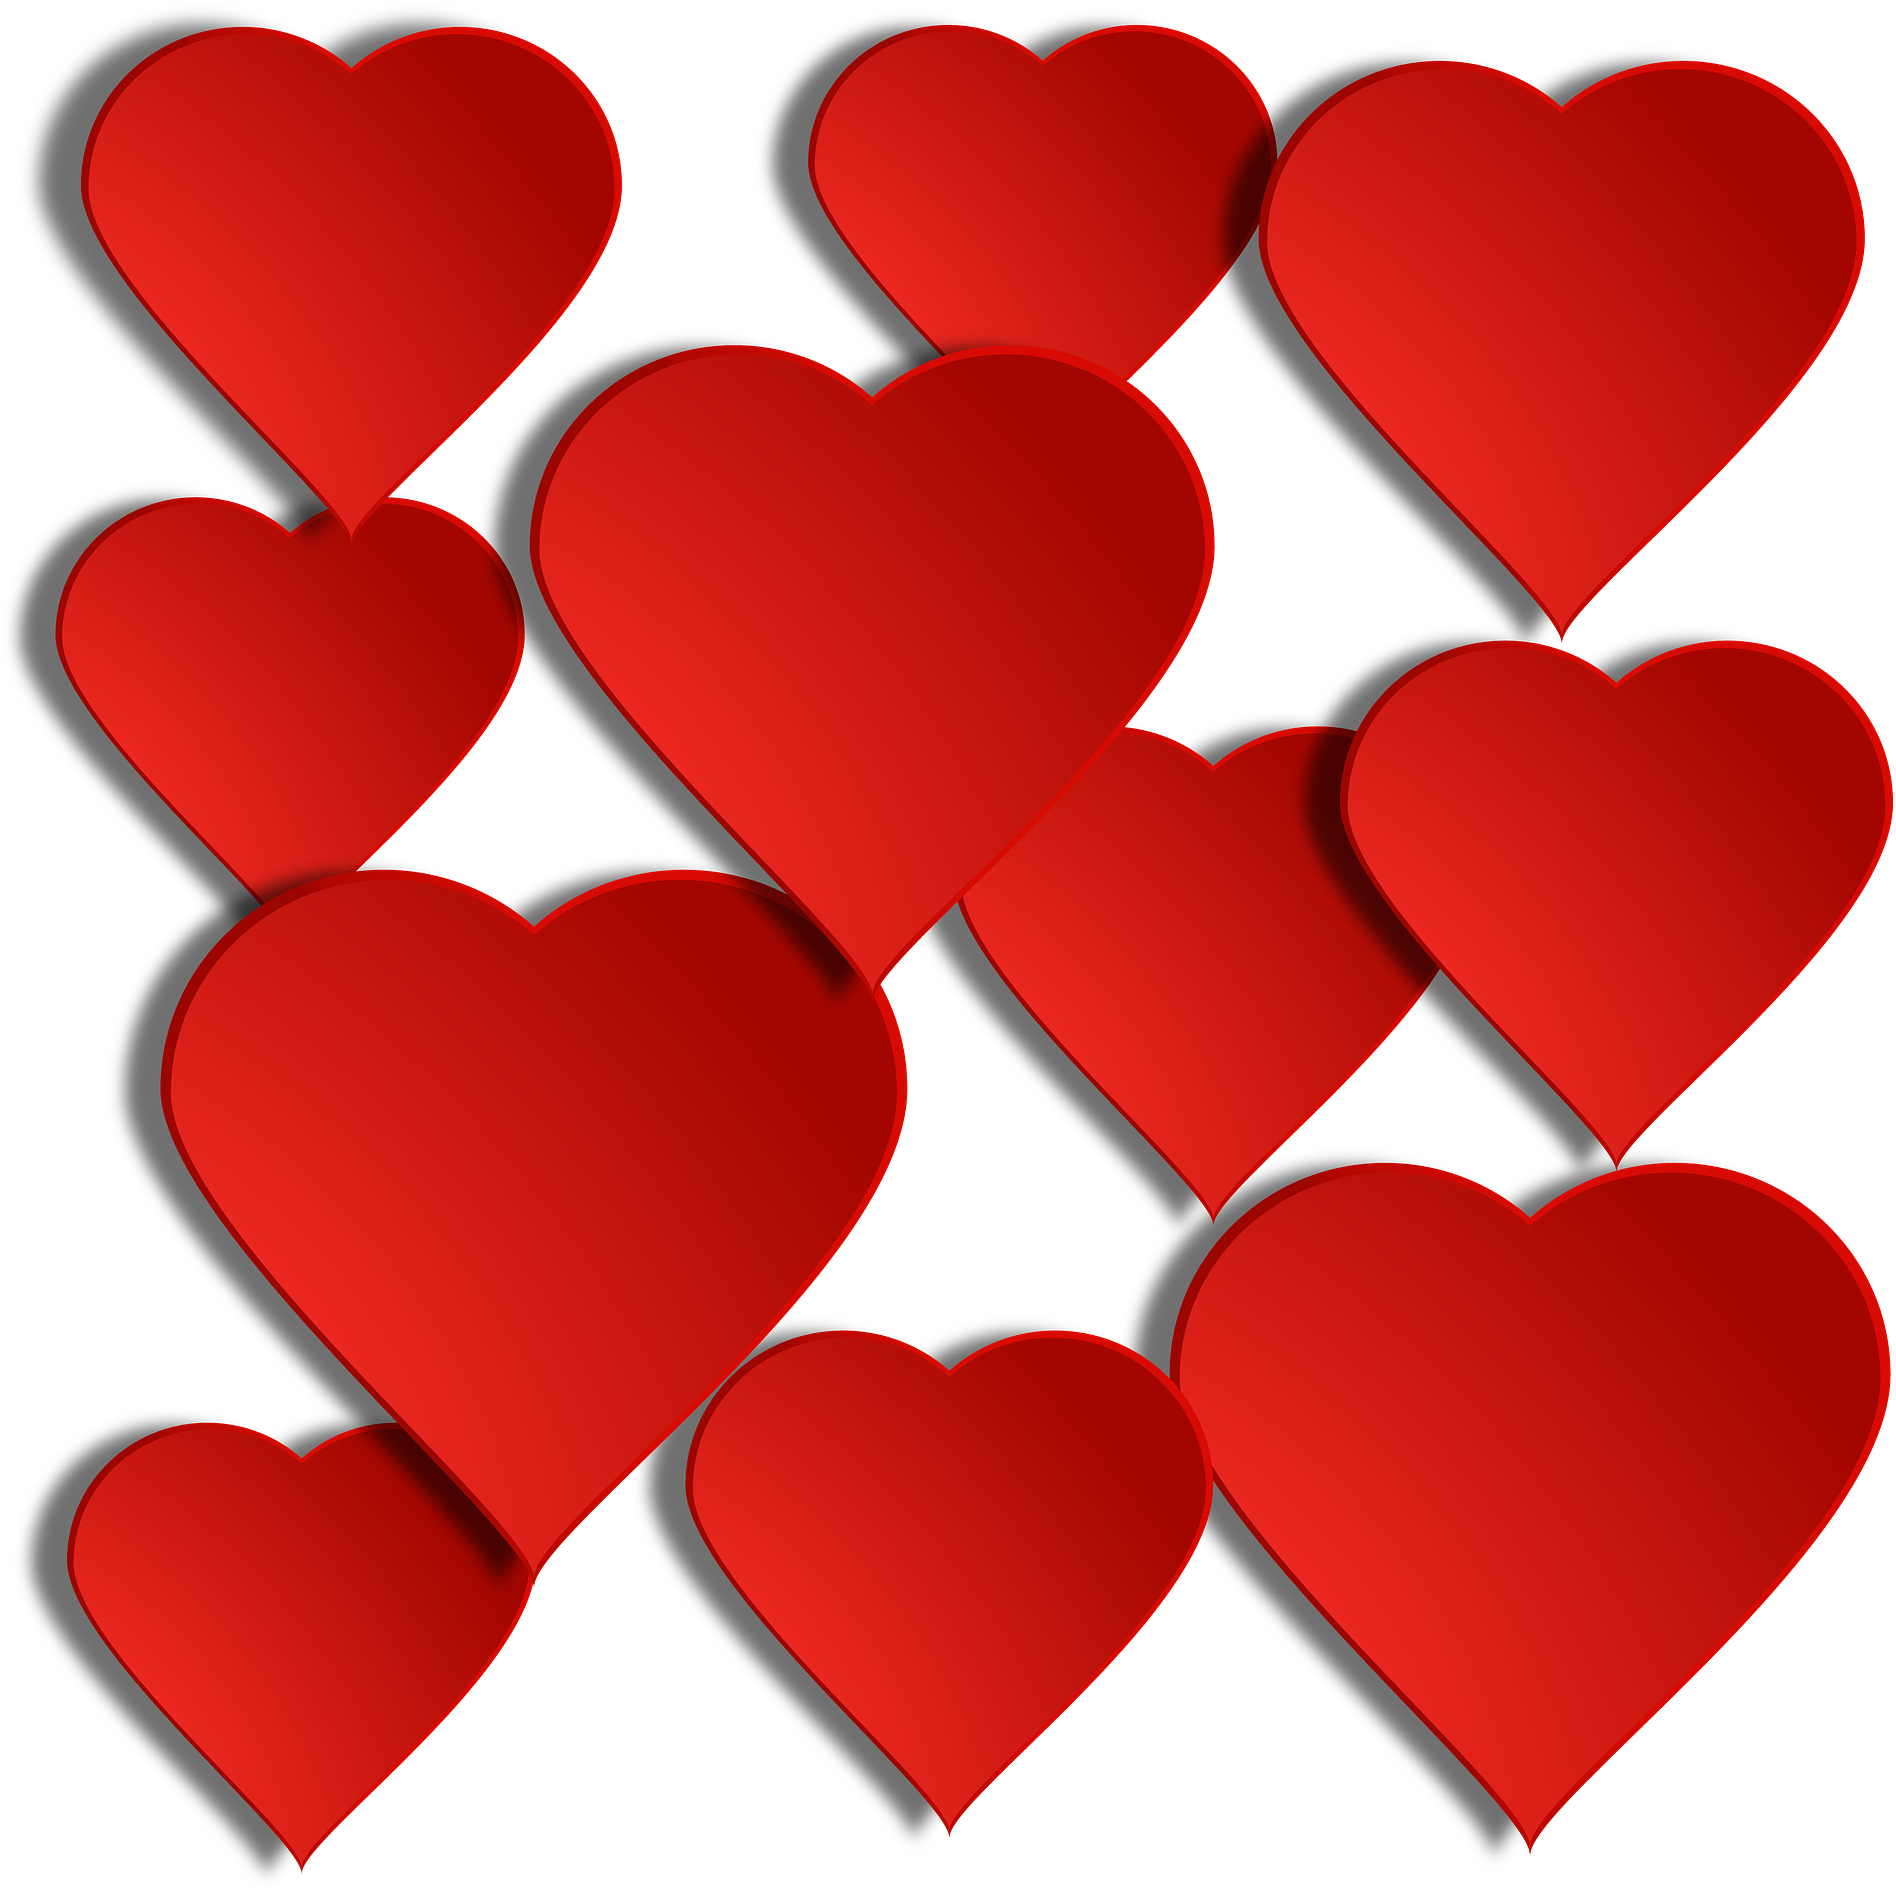 Valentines Day Hearts - Floating Hearts Png (1920x1920)